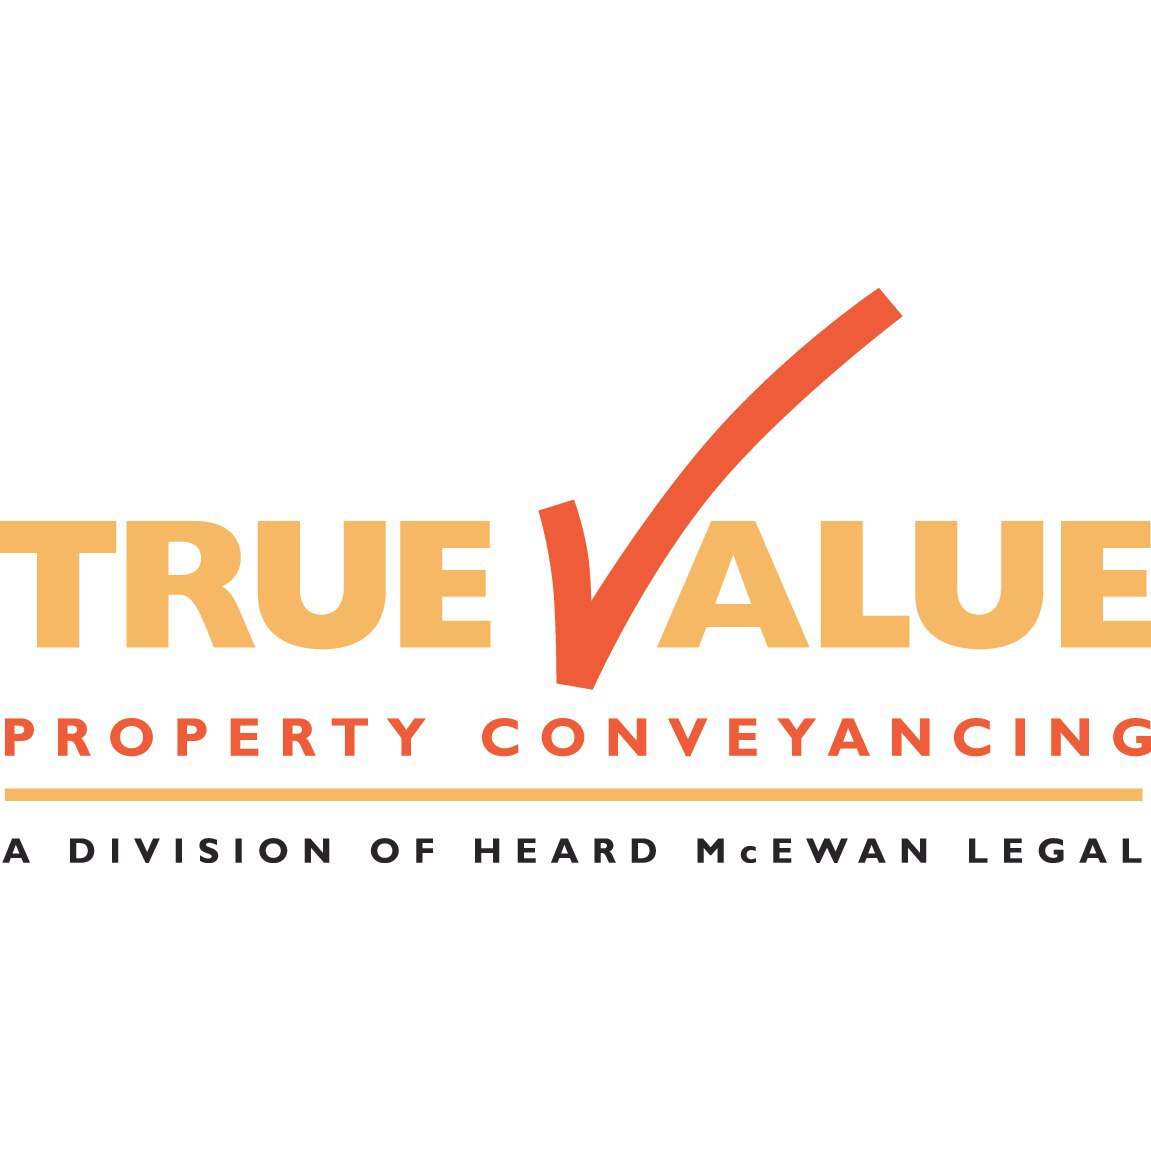 True Value Property Conveyancing - Nowra, NSW 2541 - (02) 4254 5200 | ShowMeLocal.com